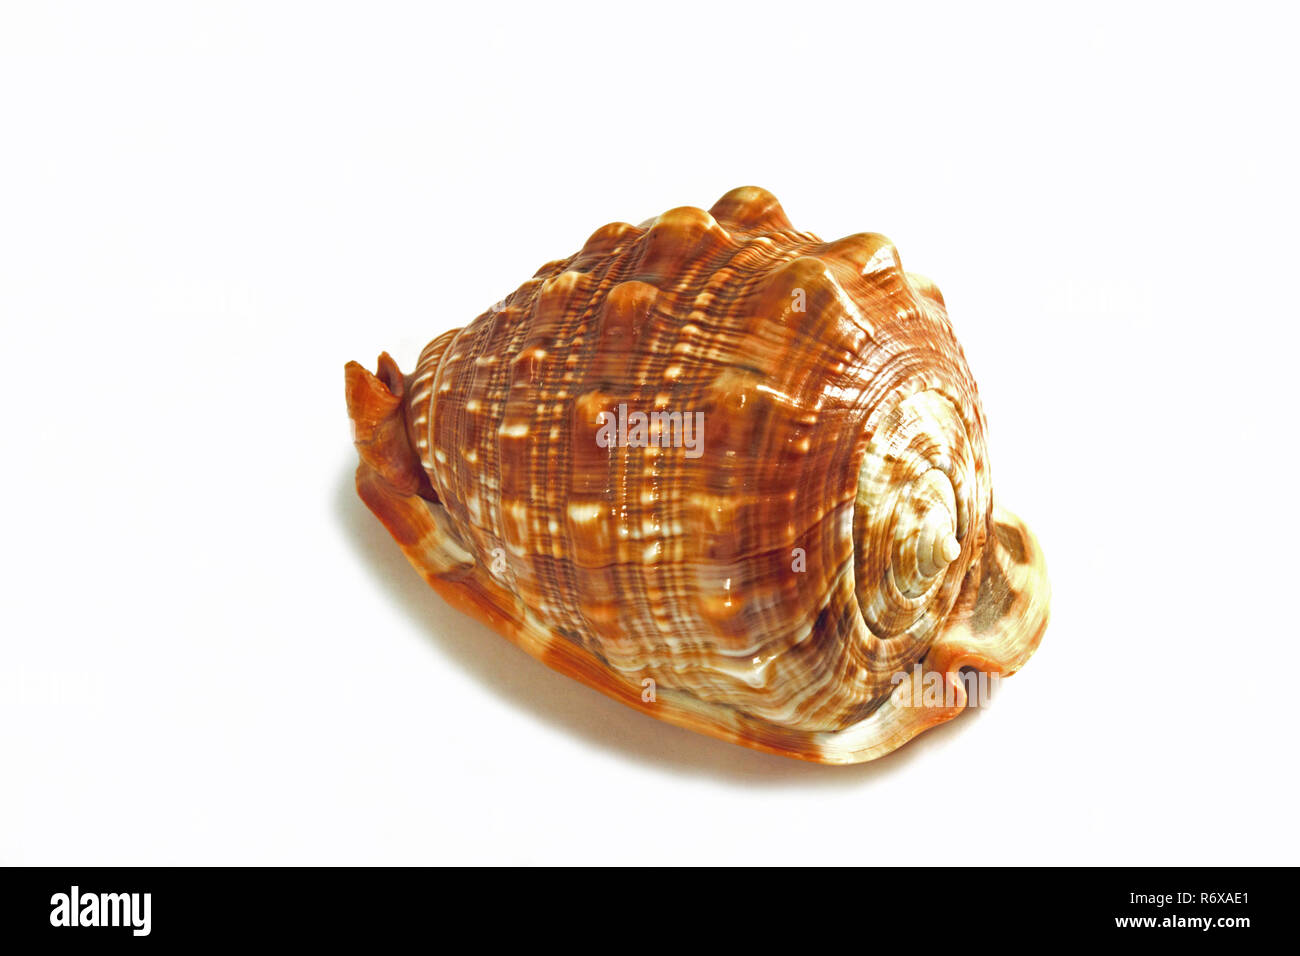 The horned helmet (Cassis cornuta) is one of the biggest sea snails. This 30 cm shell was found in the Indian pacific. Isolated studio photograph on w Stock Photo